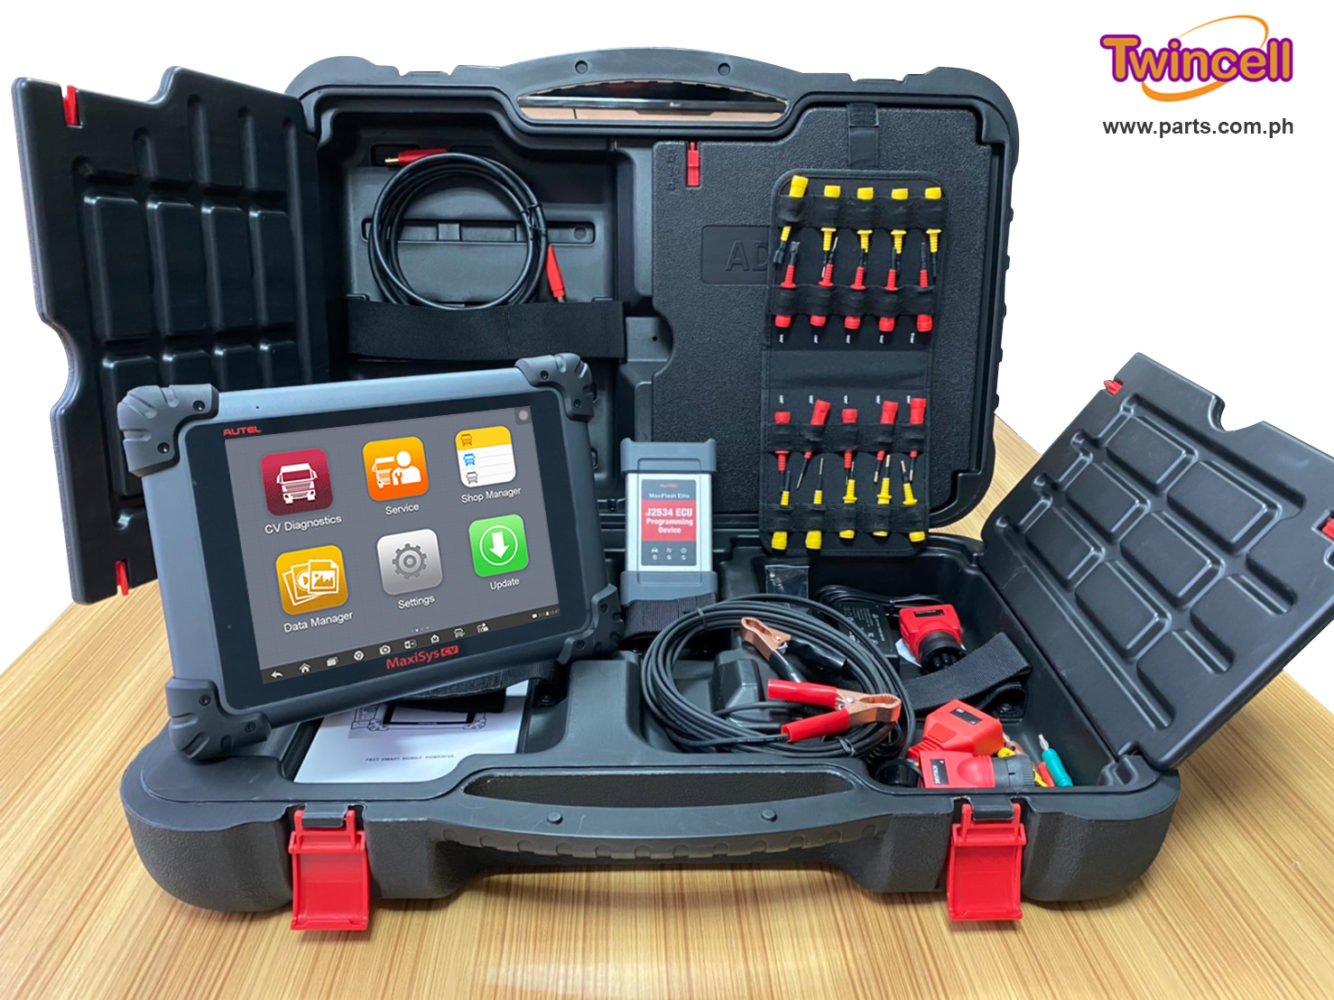 Autel Maxisys Ms908cv Commercial Truck Diagnostic Scanner Twincell